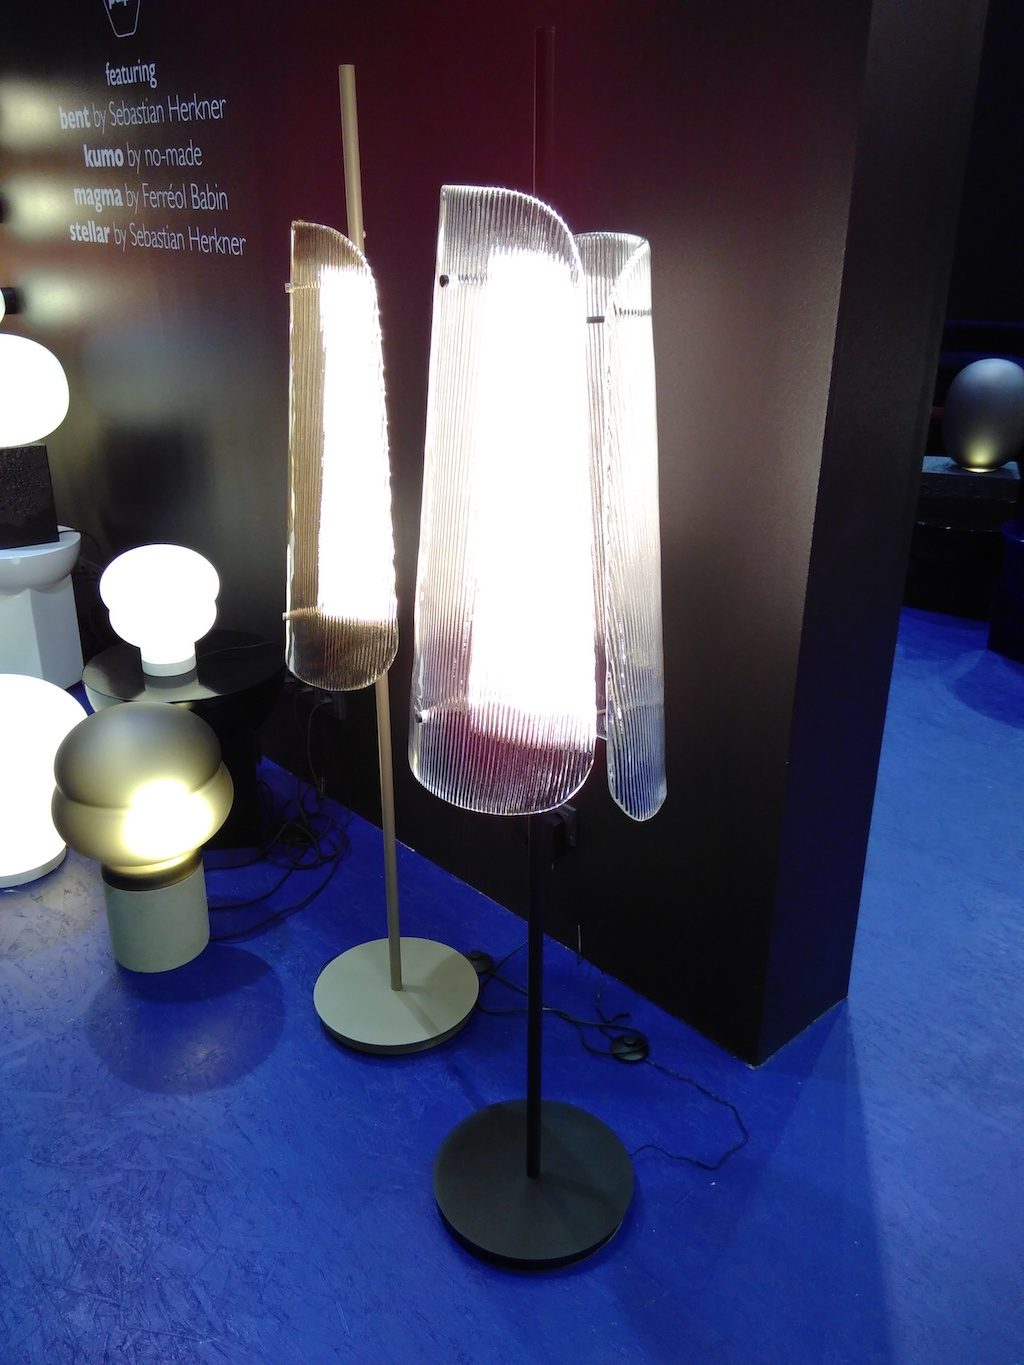 Review: Imm Cologne 2019